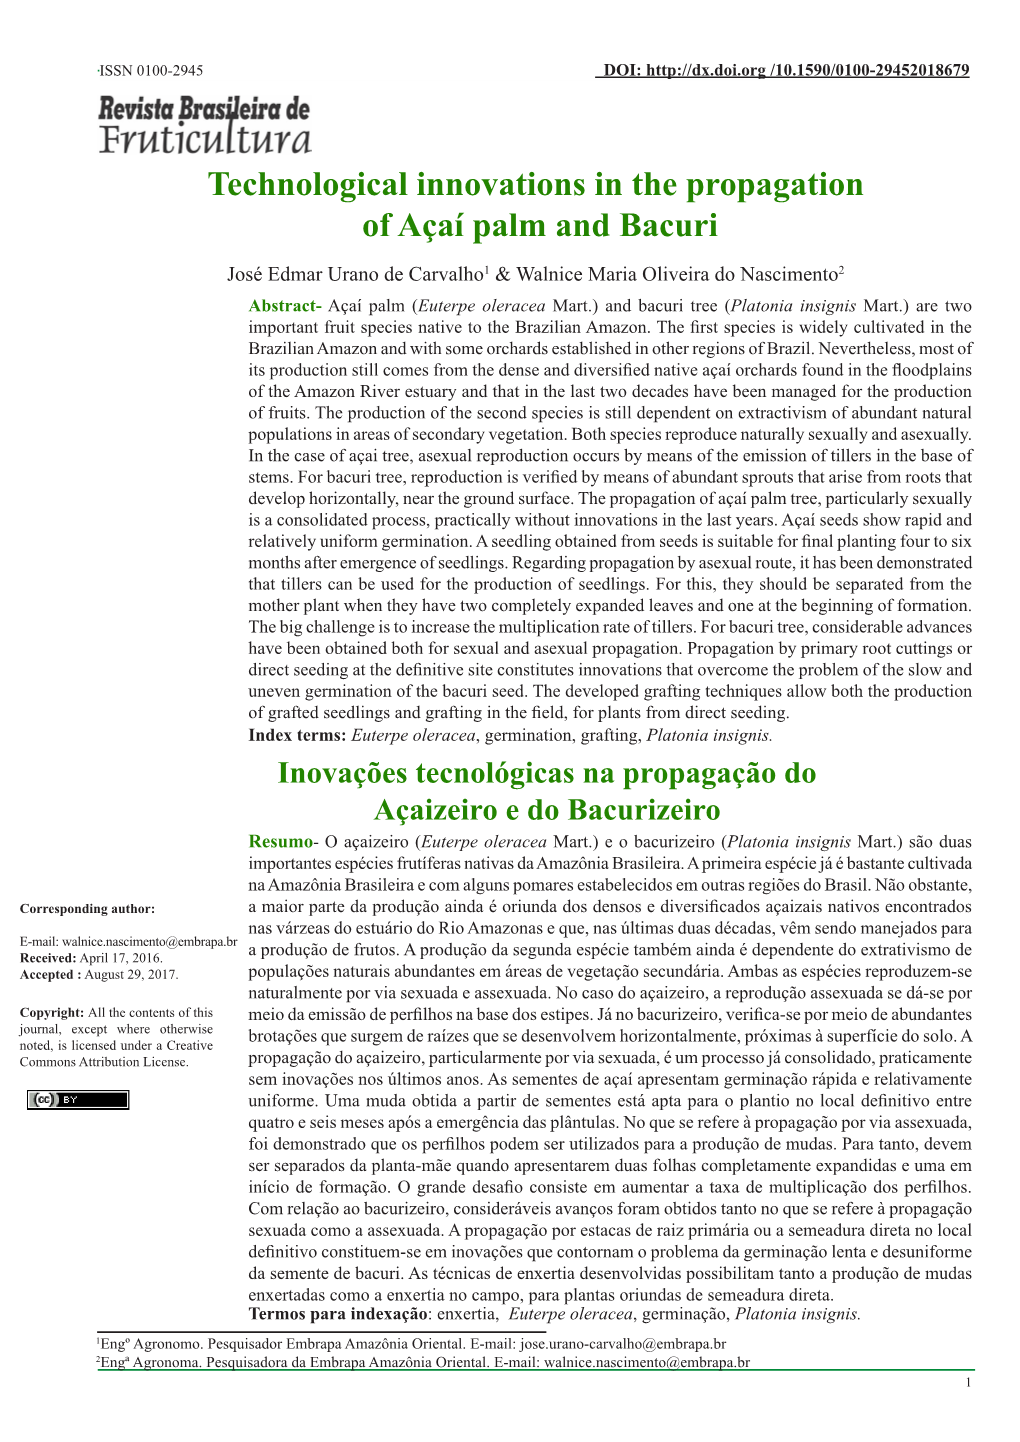 Technological Innovations in the Propagation of Açaí Palm and Bacuri